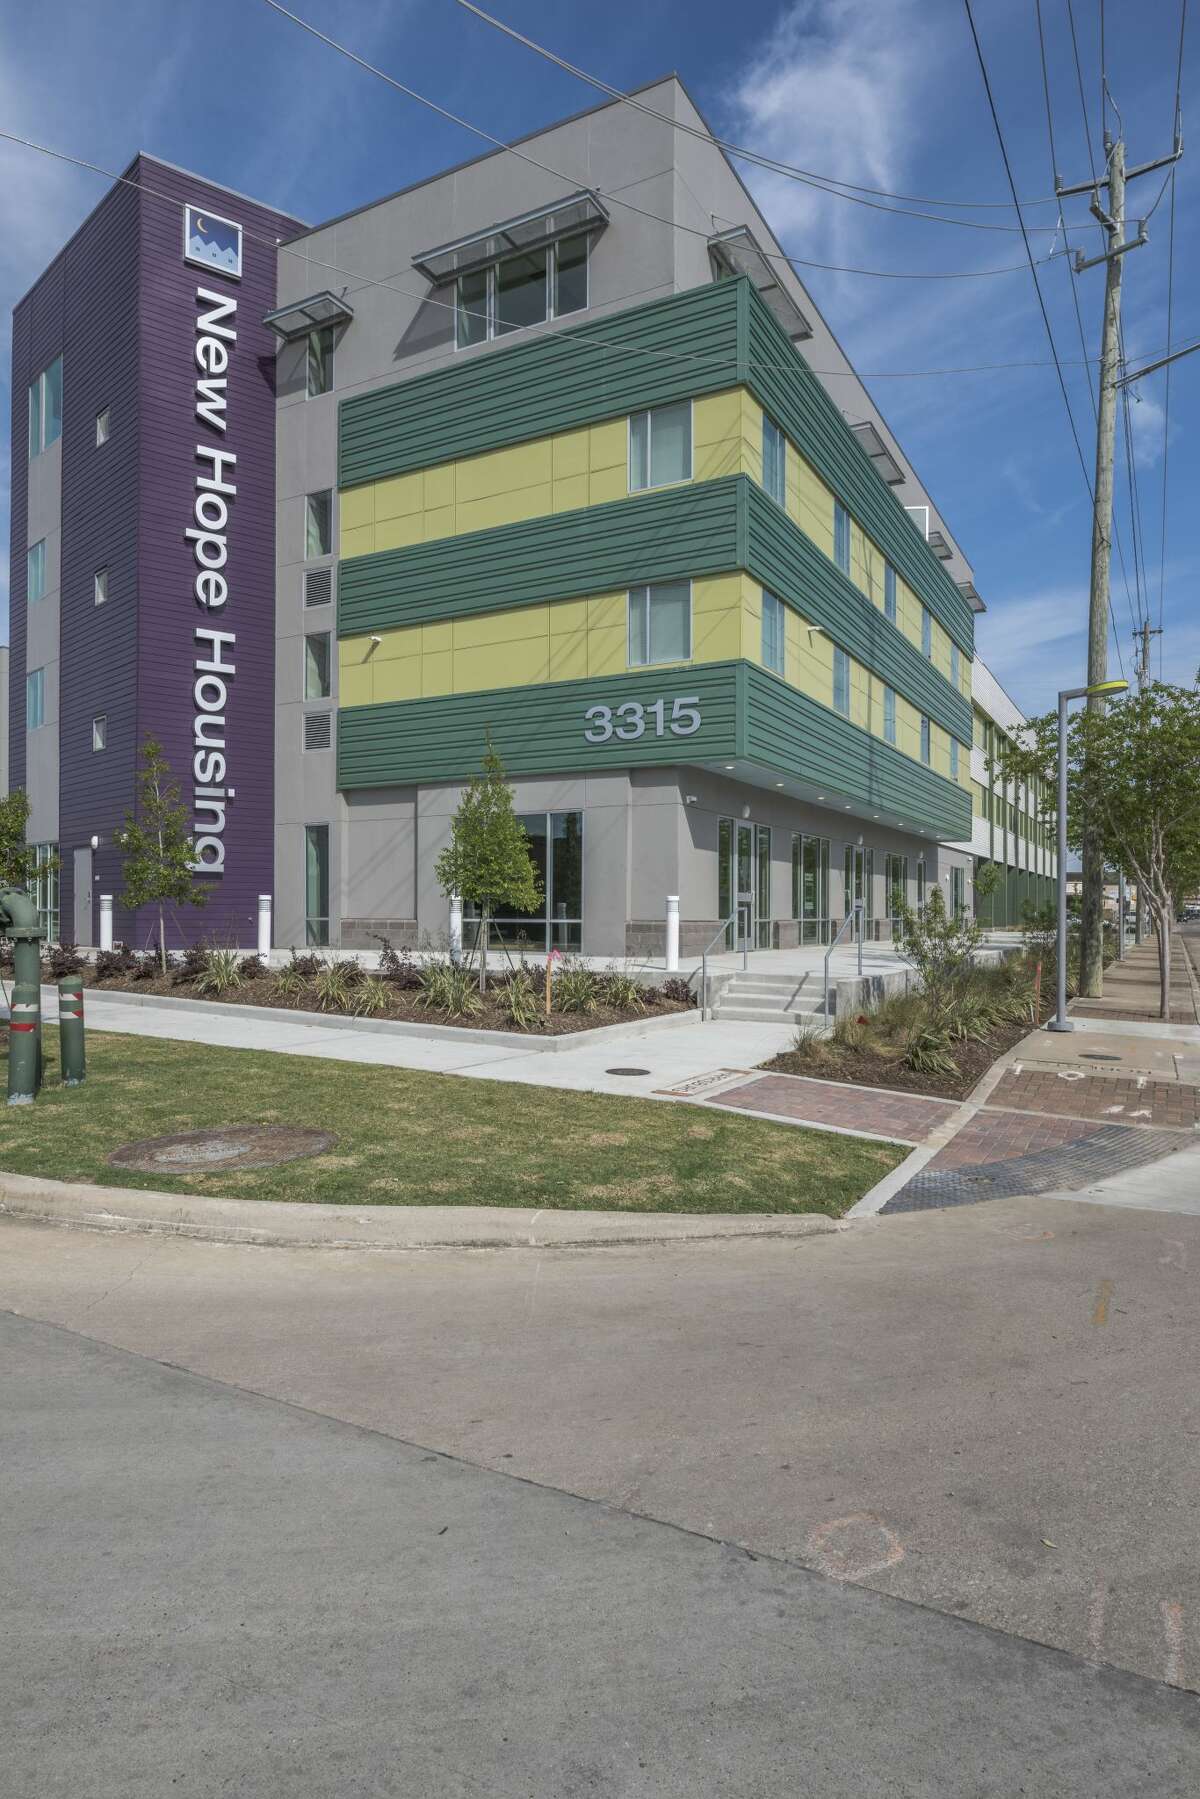 New Hope Housing at Harrisburg is a mixed-use development that incorporates street-level retail and commercial office space with single-room occupancy residential apartment homes.